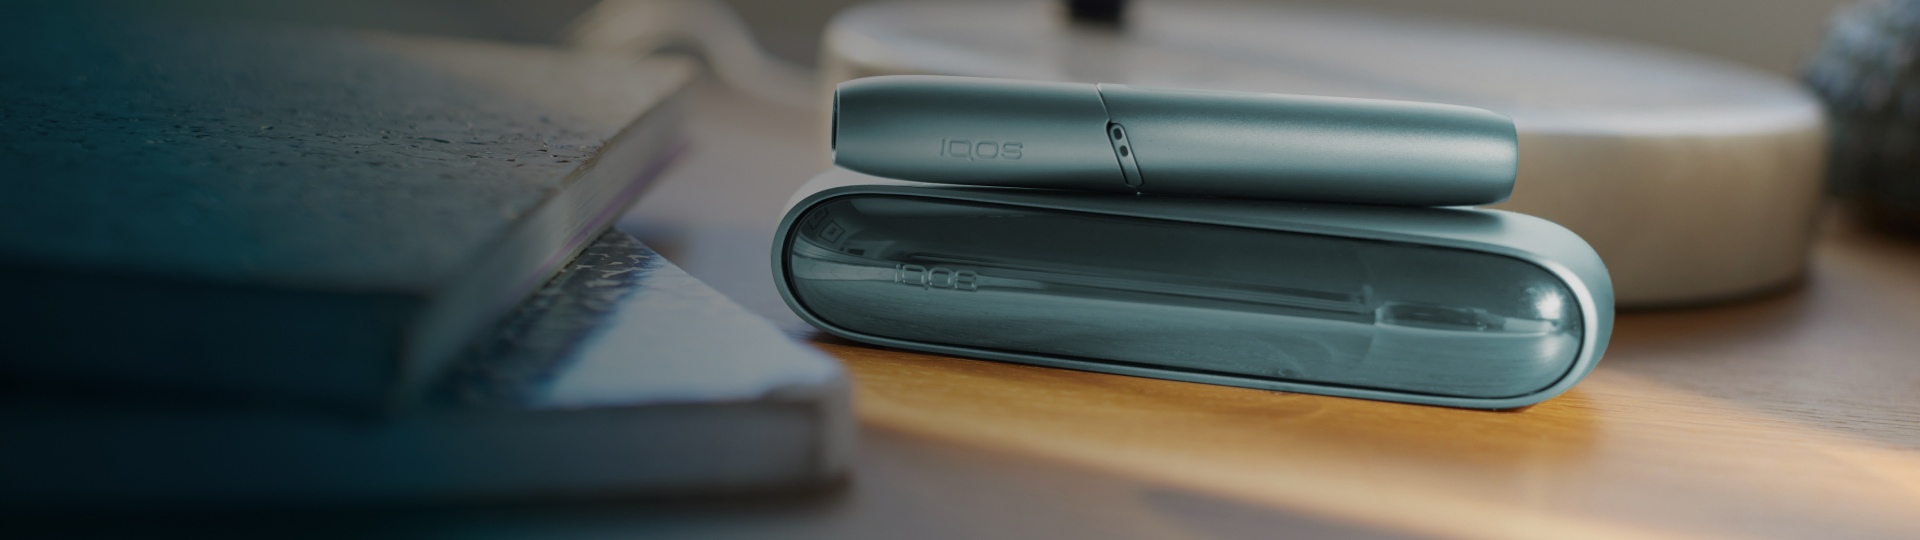 Transitioning to IQOS - cleaner, and significantly cheaper